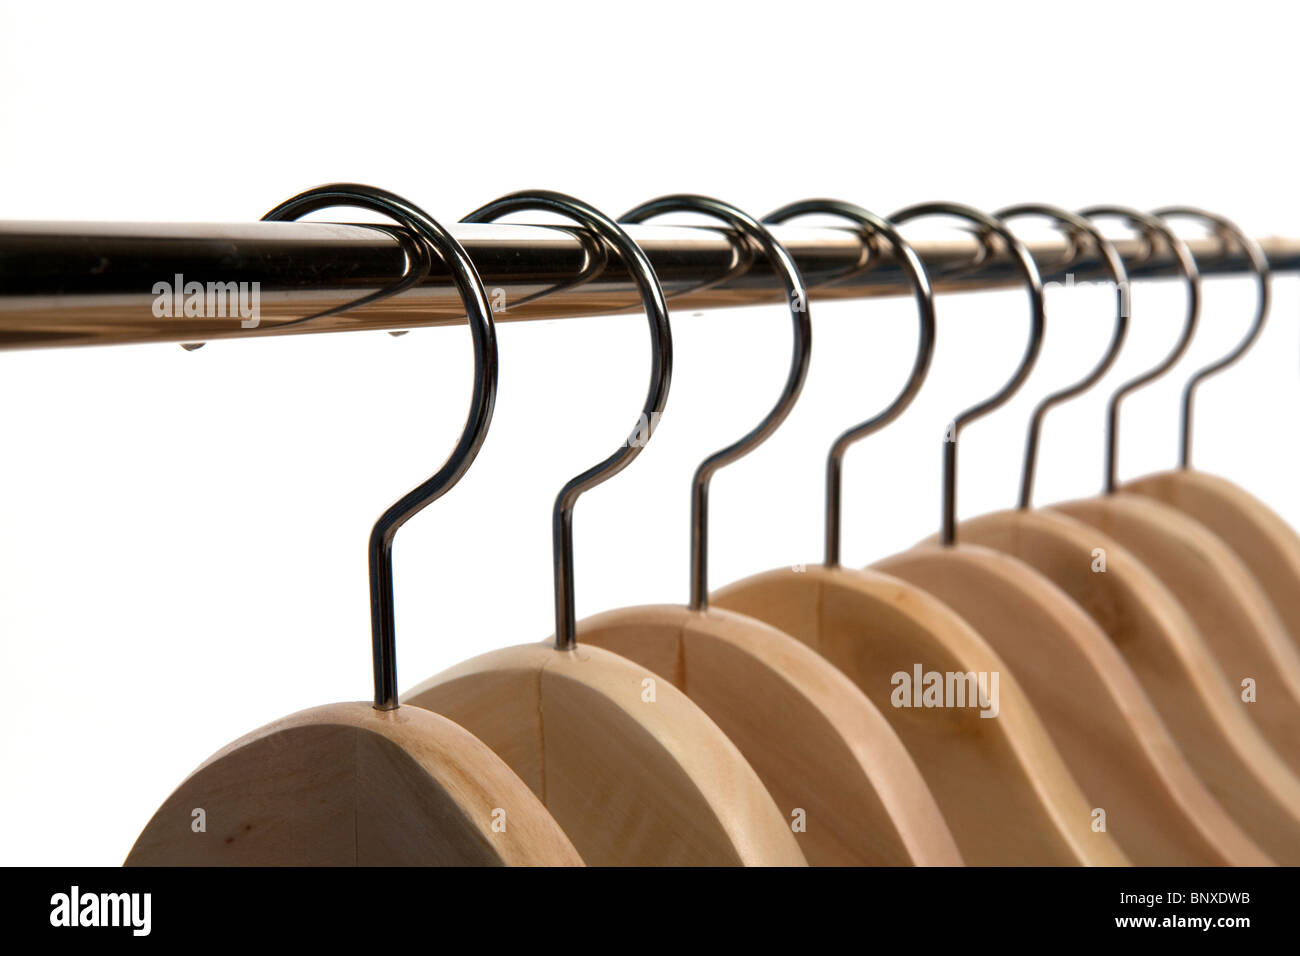 Black Wooden Hangers Hanging On Rack Rail Stock Photo, Picture and Royalty  Free Image. Image 32578781.